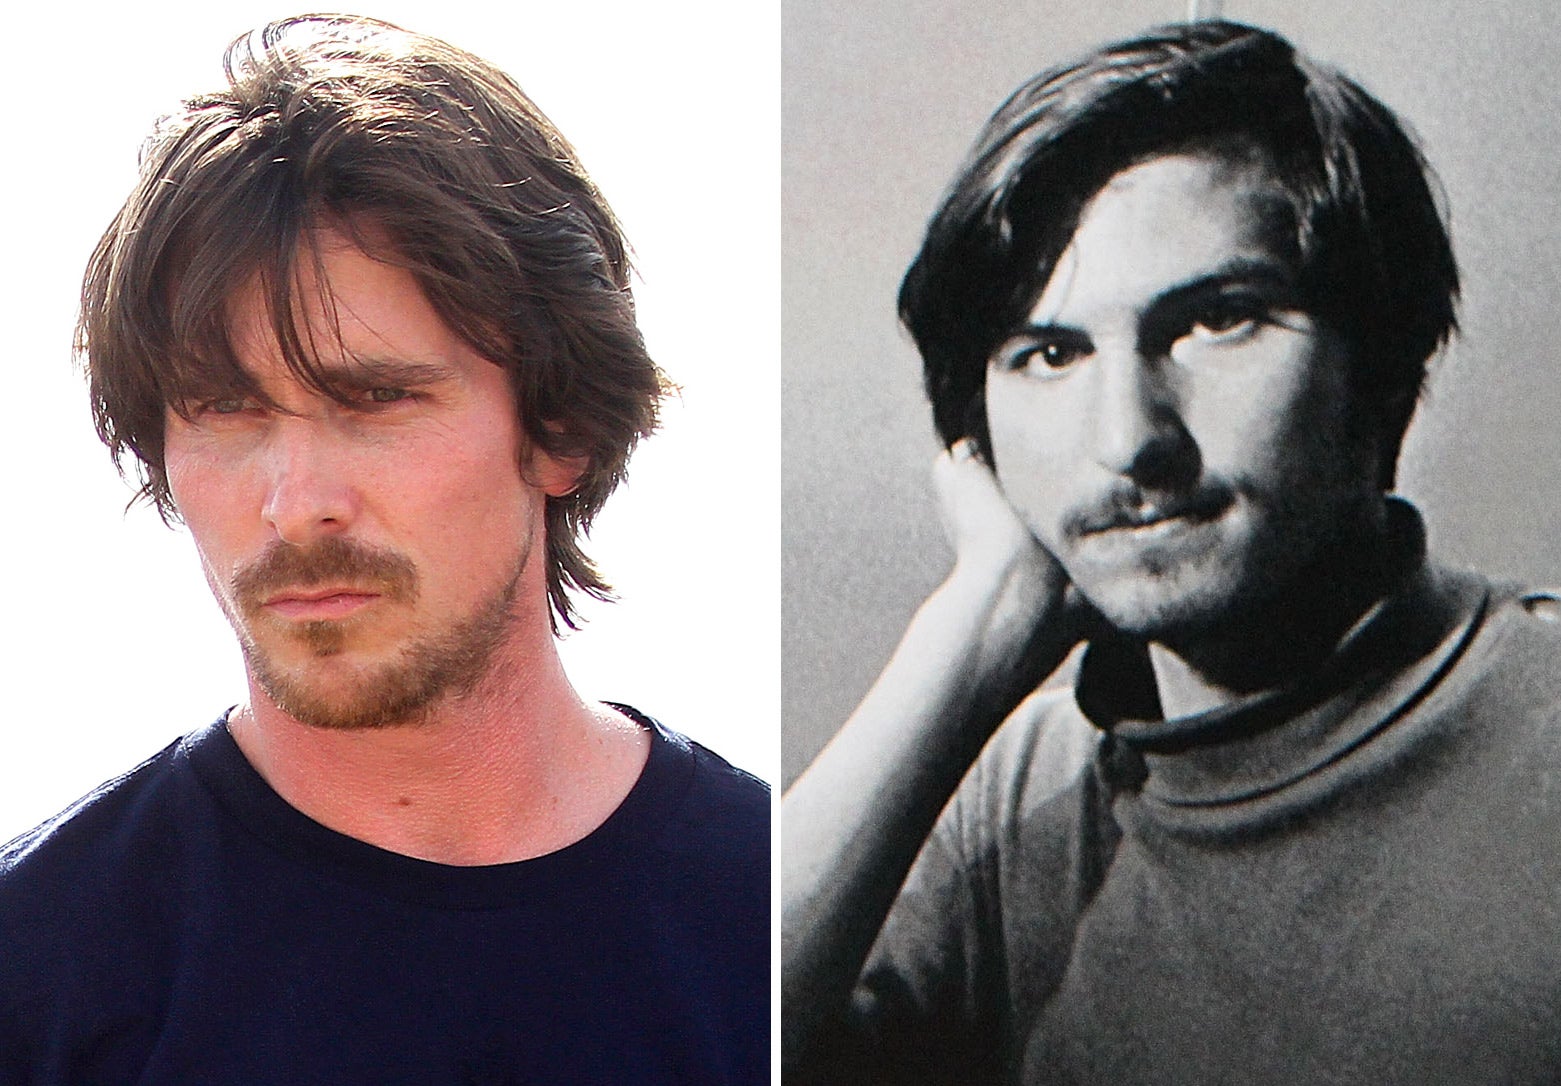 Christian Bale is rumoured to be playing Steve Jobs in Danny Boyle's Apple biopic